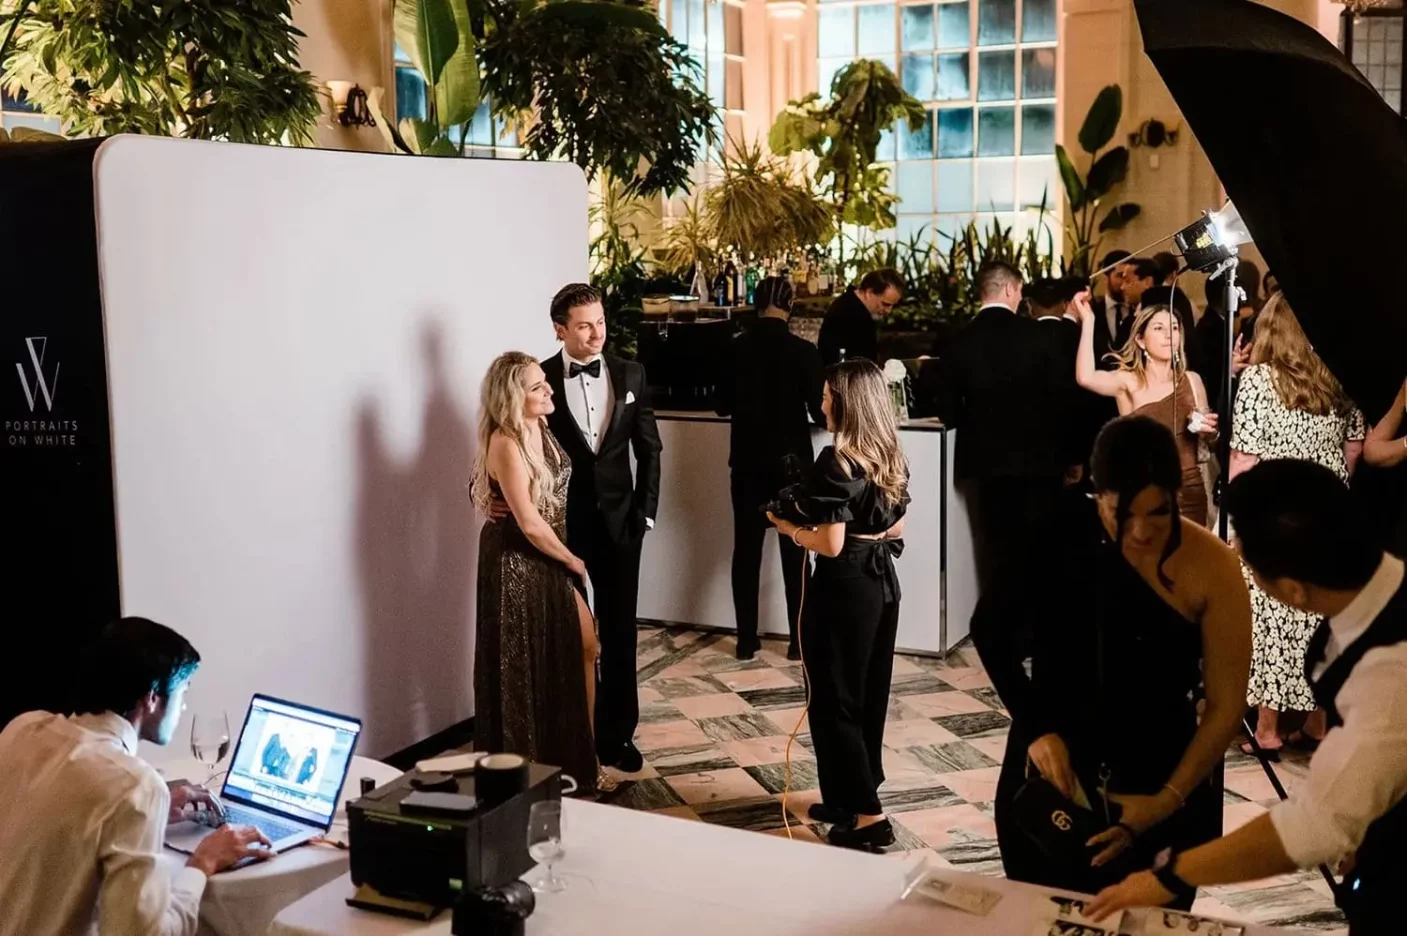 A man and a woman get ready to have their portrait taken at an upscale event in Toronto